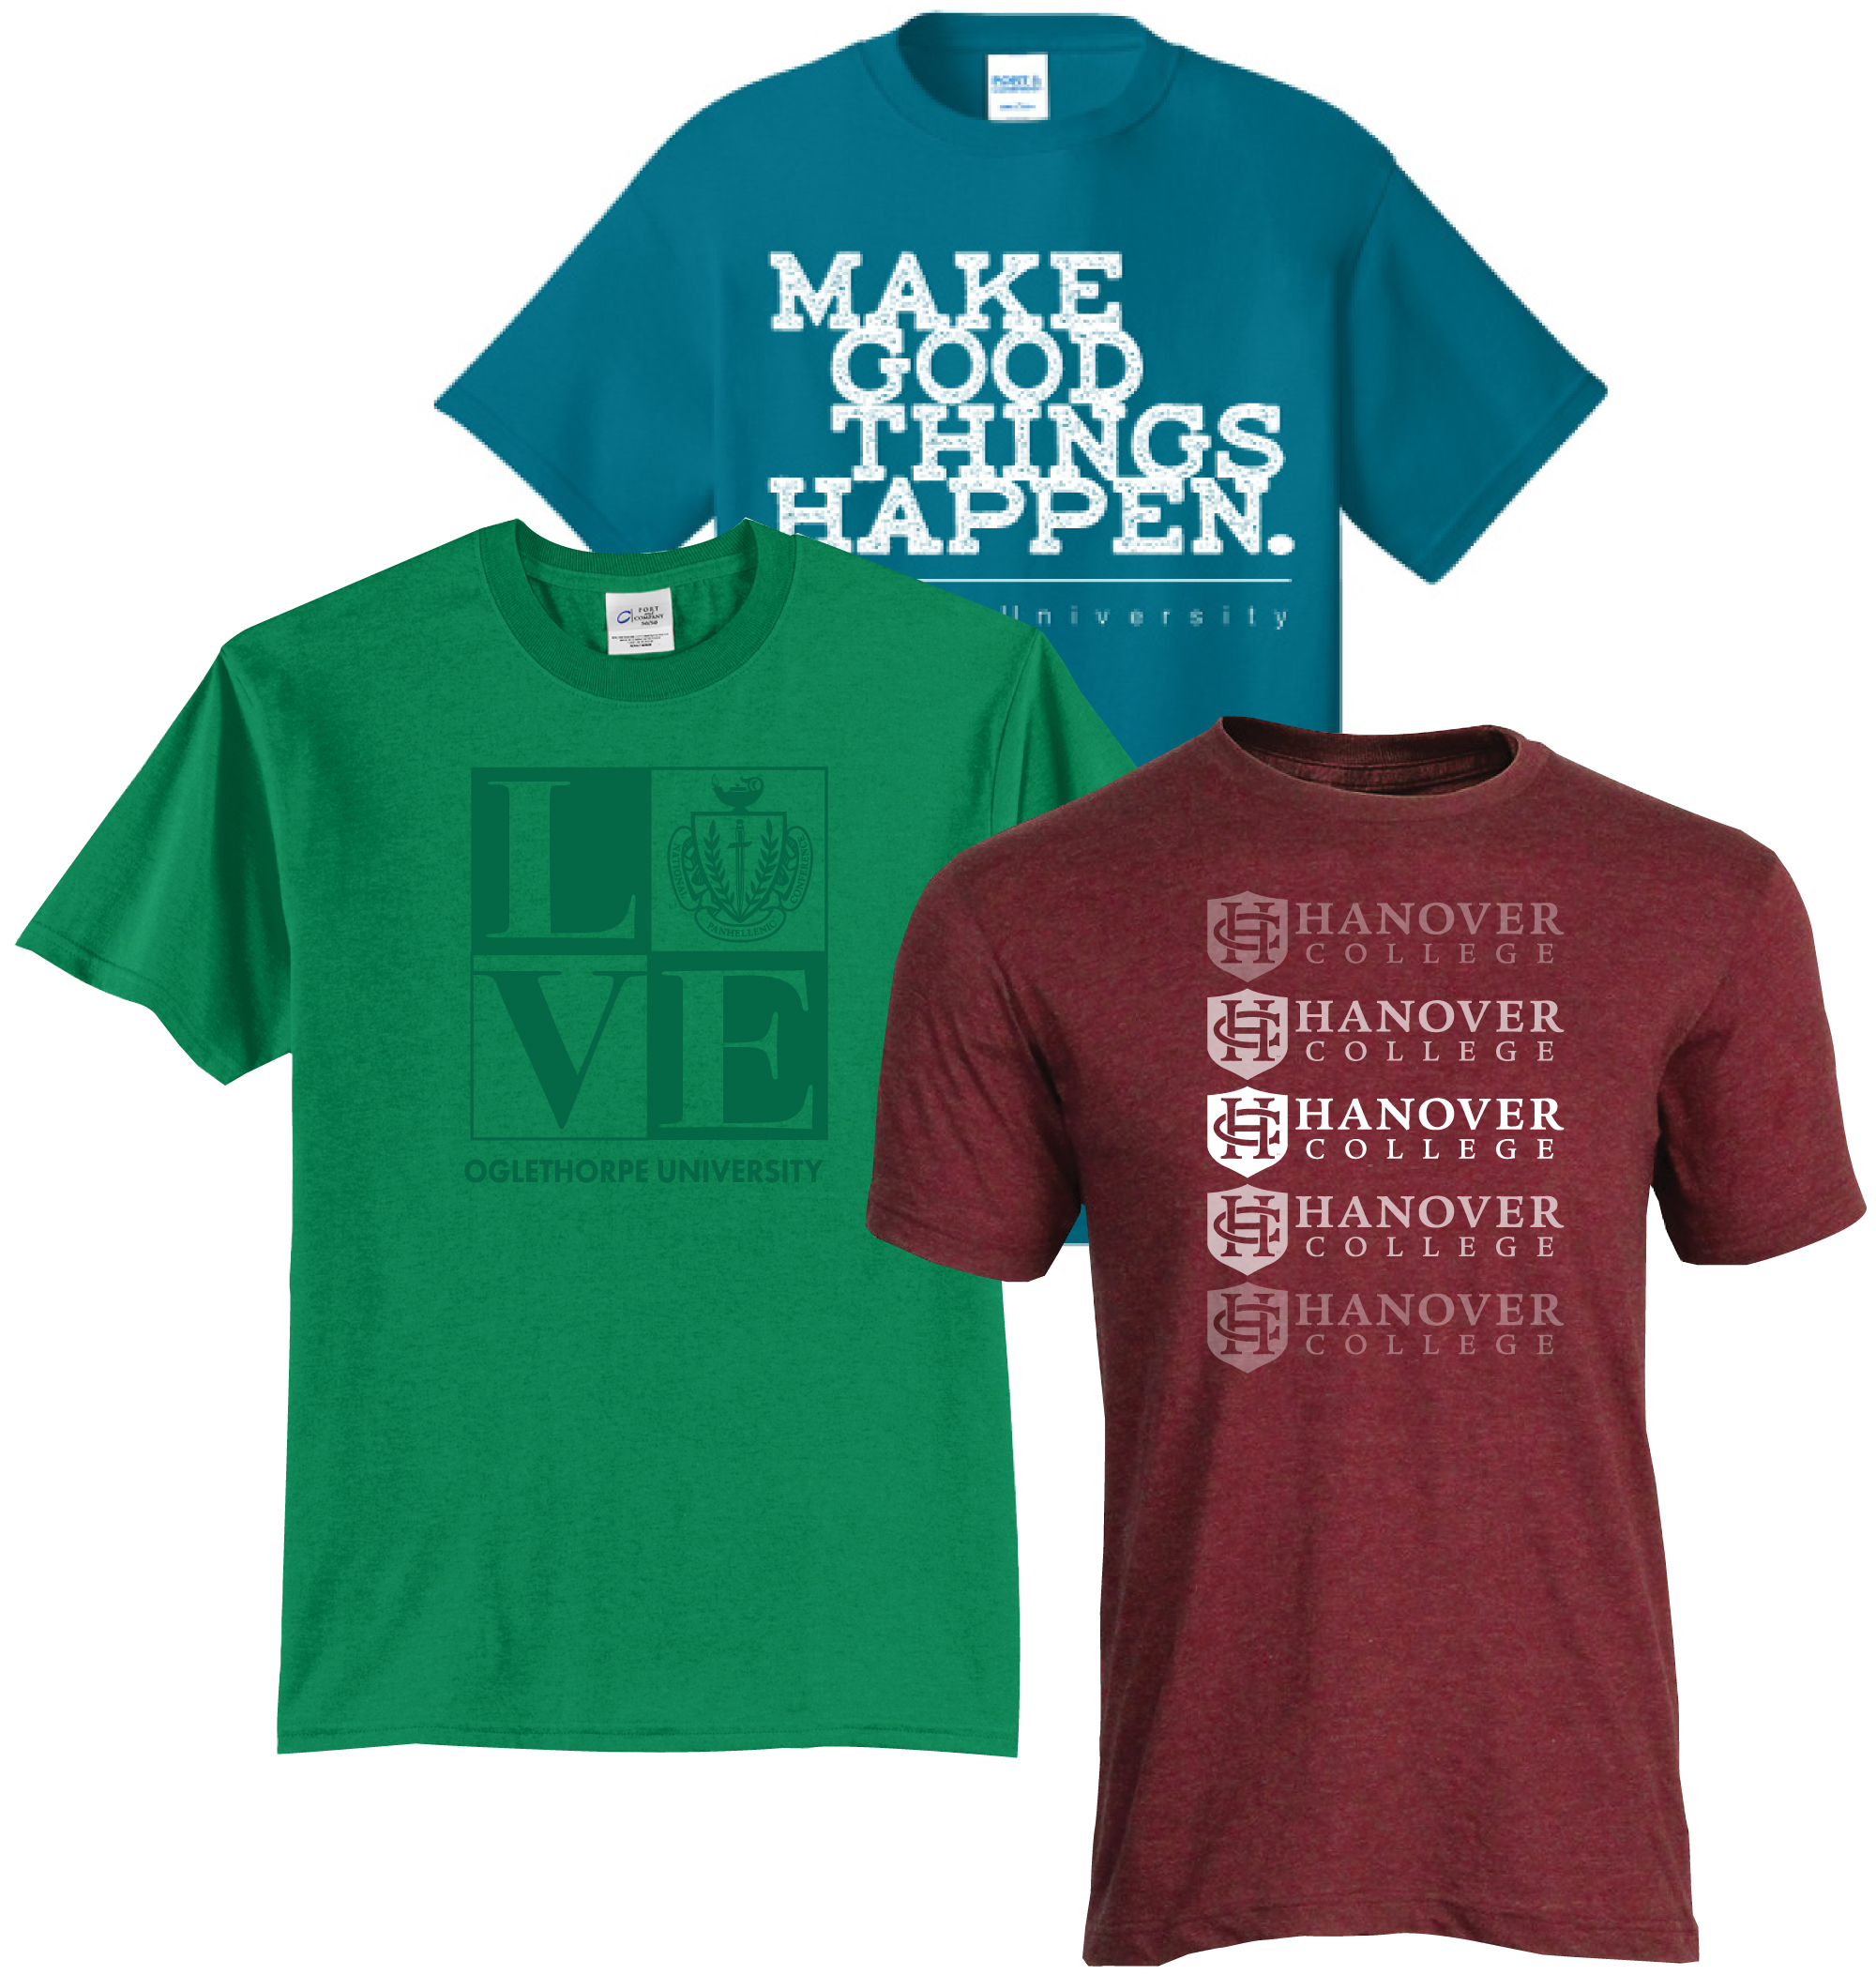 A variety of soft, lightweight shirts with college logos on the front.